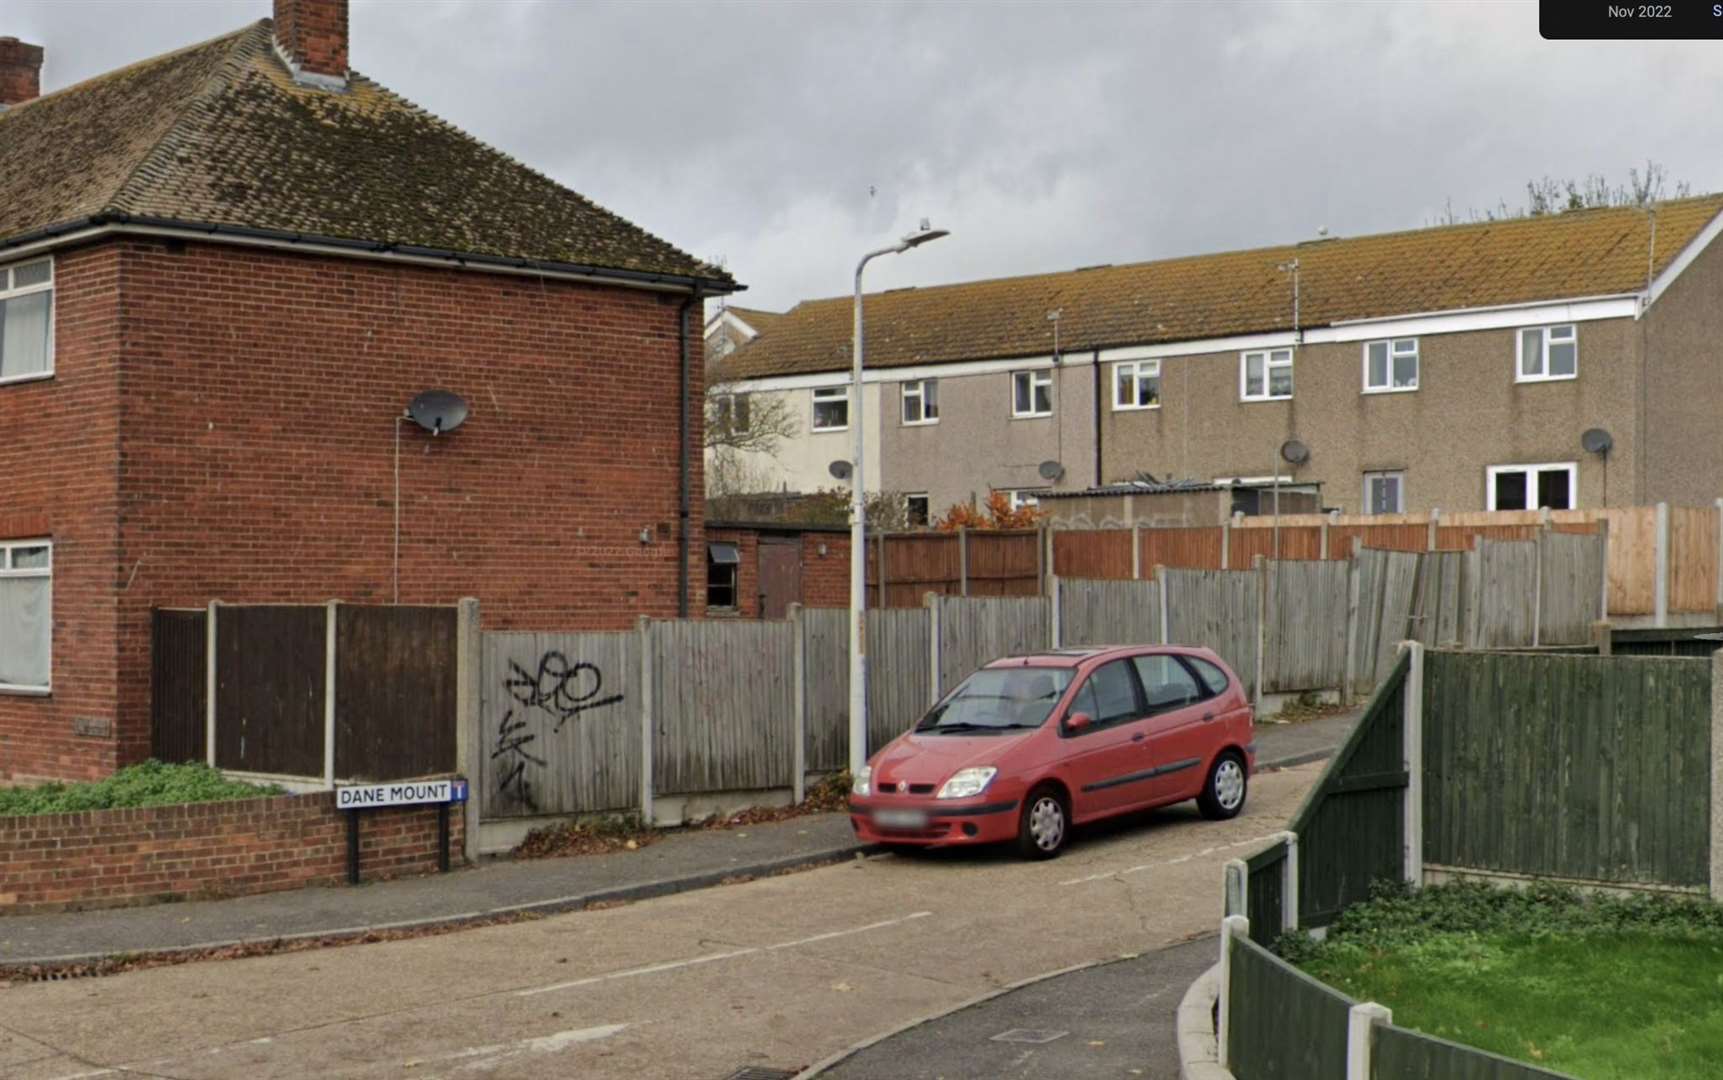 Two fire engines were called to deal with a blaze at property in Dane Mount, Margate. Photo: Google Maps